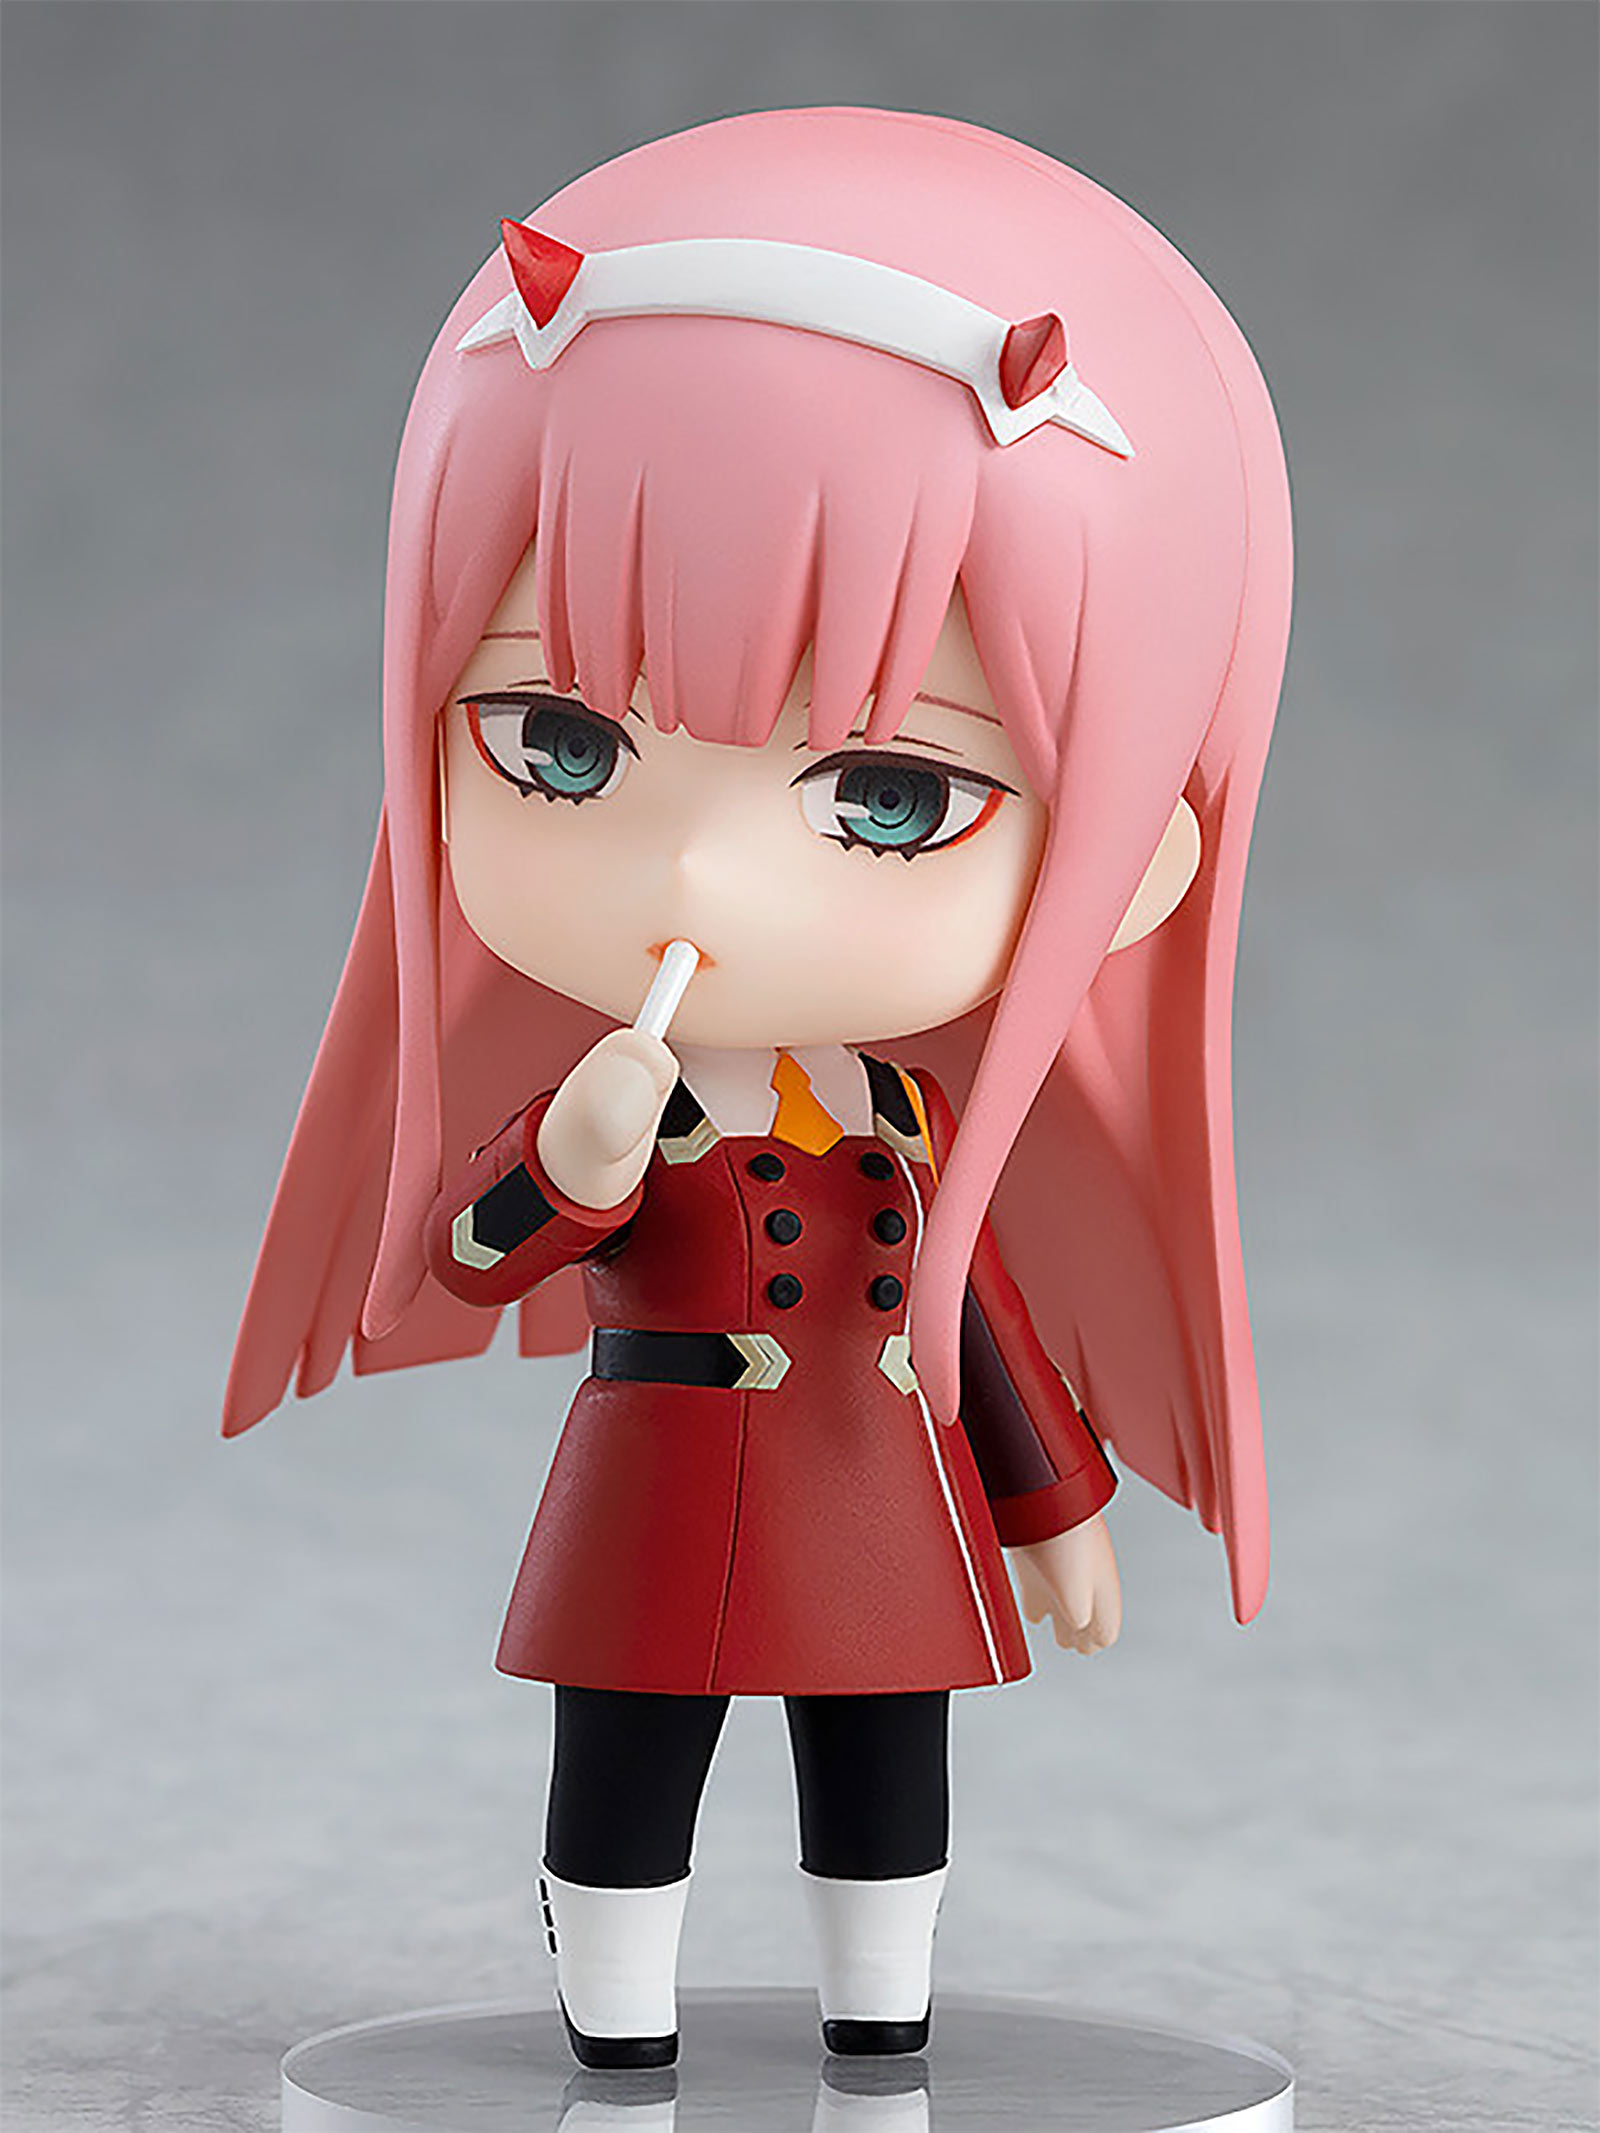 DARLING in the FRANXX - Zero Two Nendoroid Figurine d'action